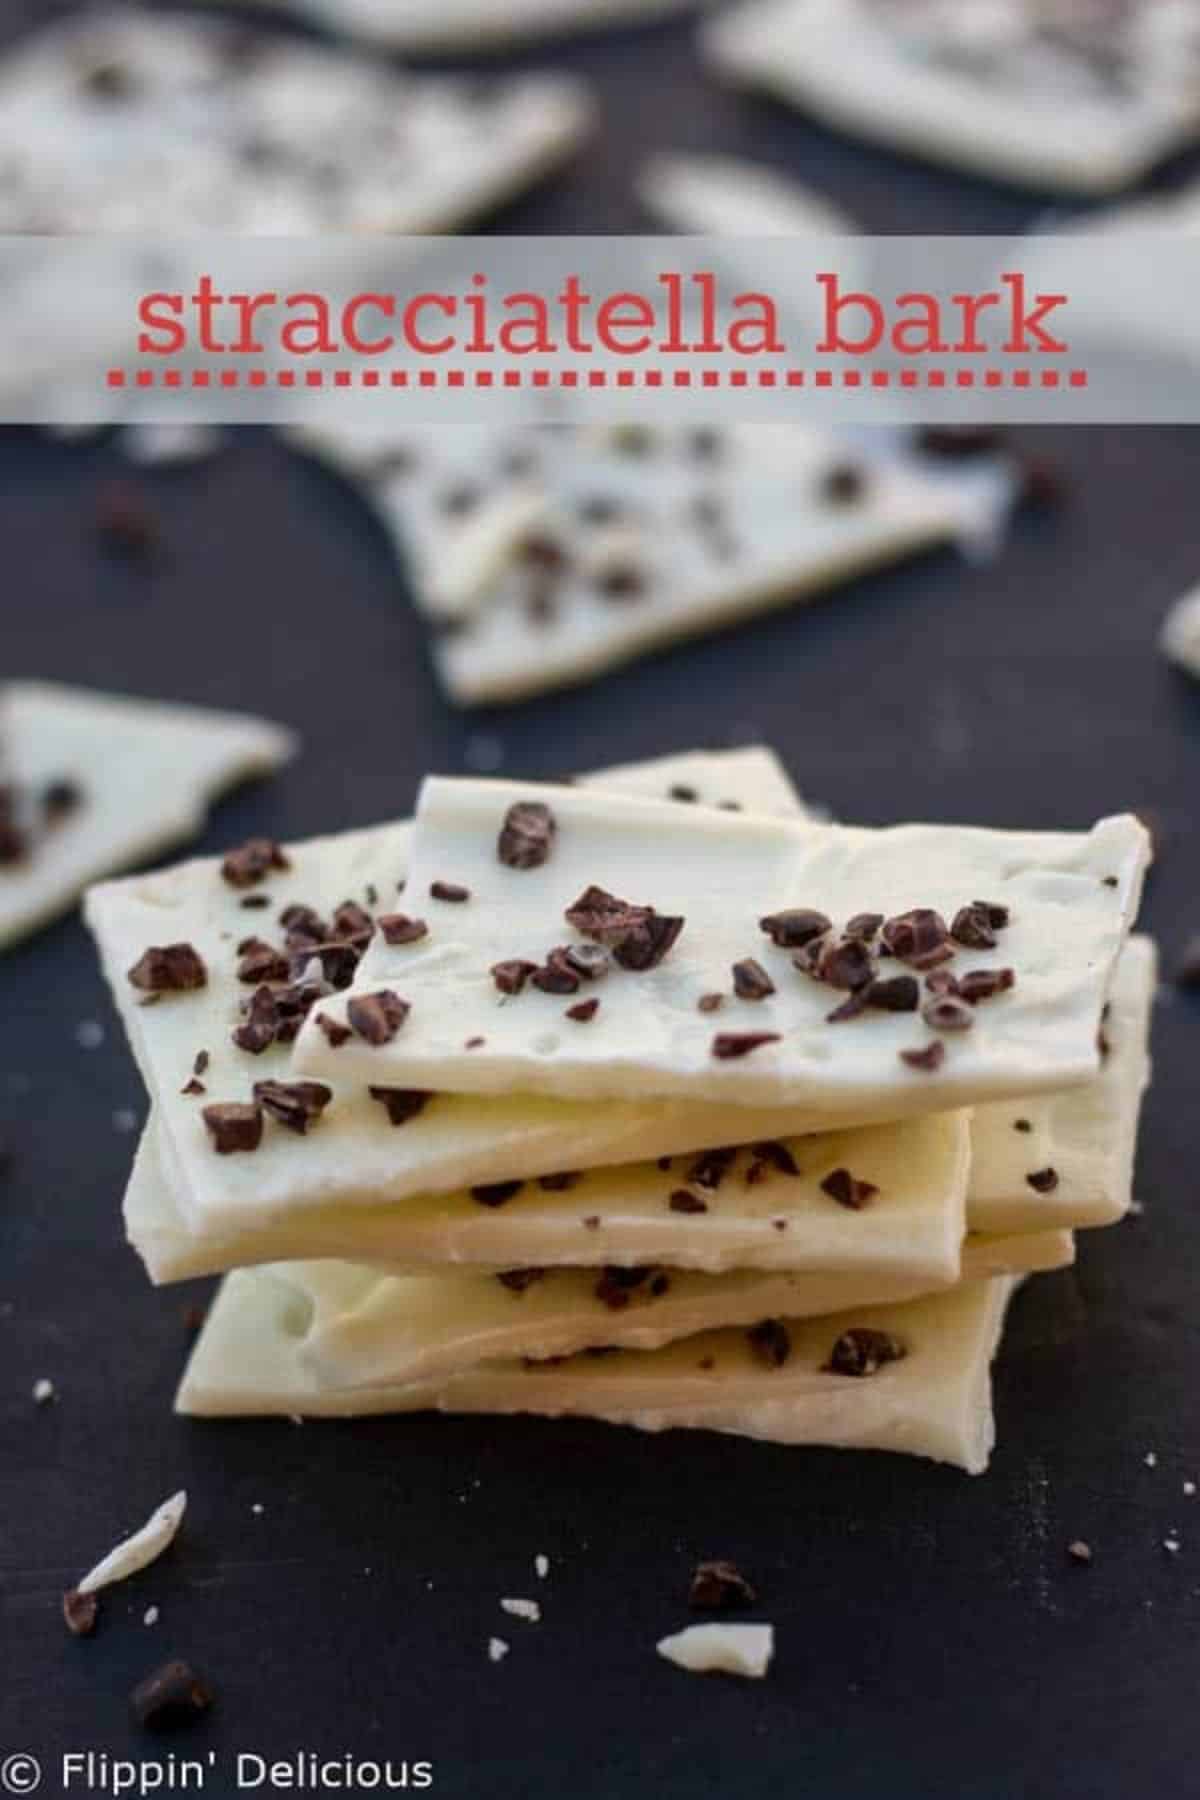 A pile of White Chocolate Bark on a black tray.